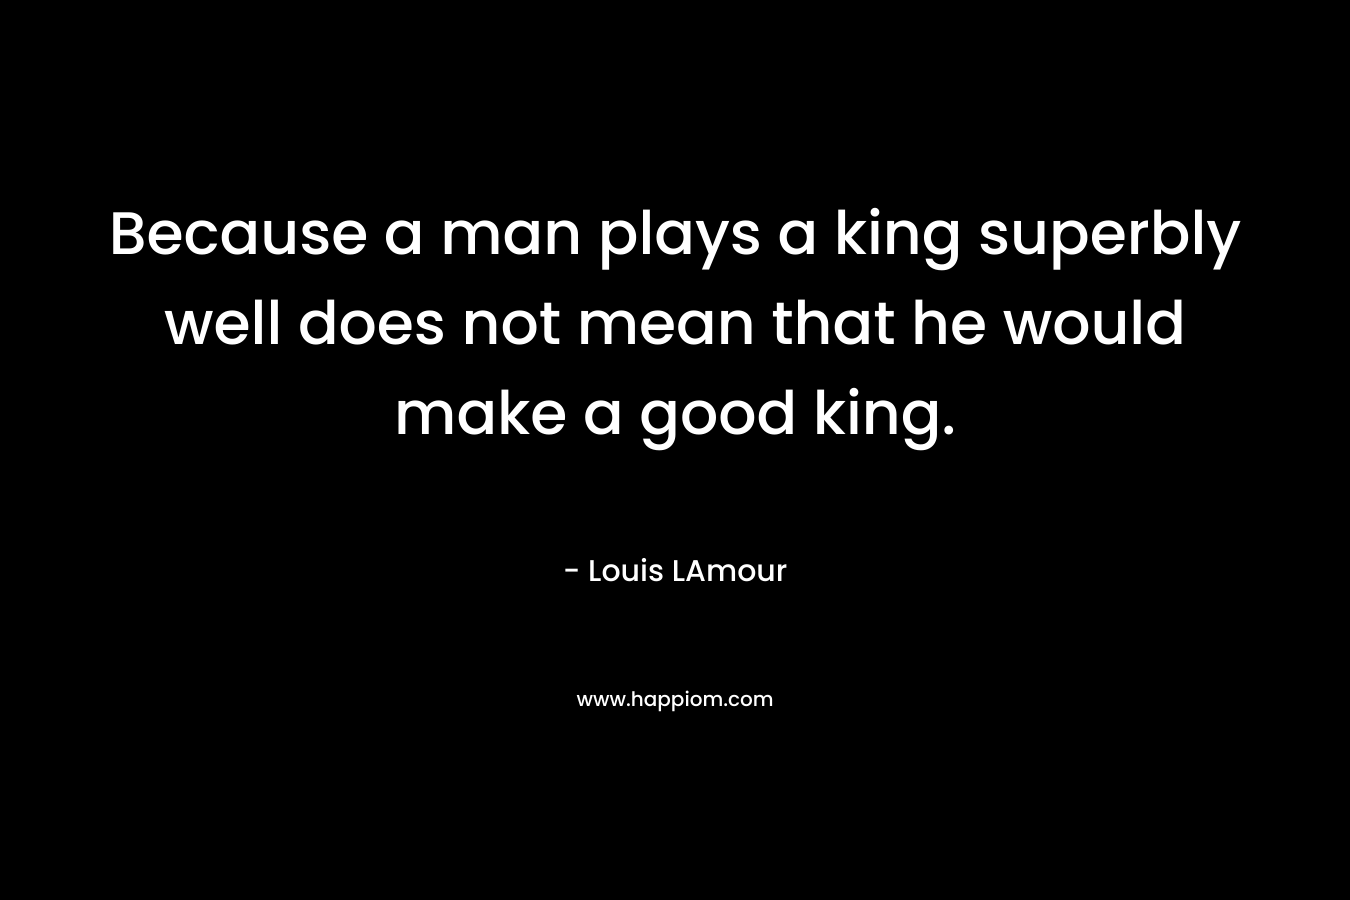 Because a man plays a king superbly well does not mean that he would make a good king.